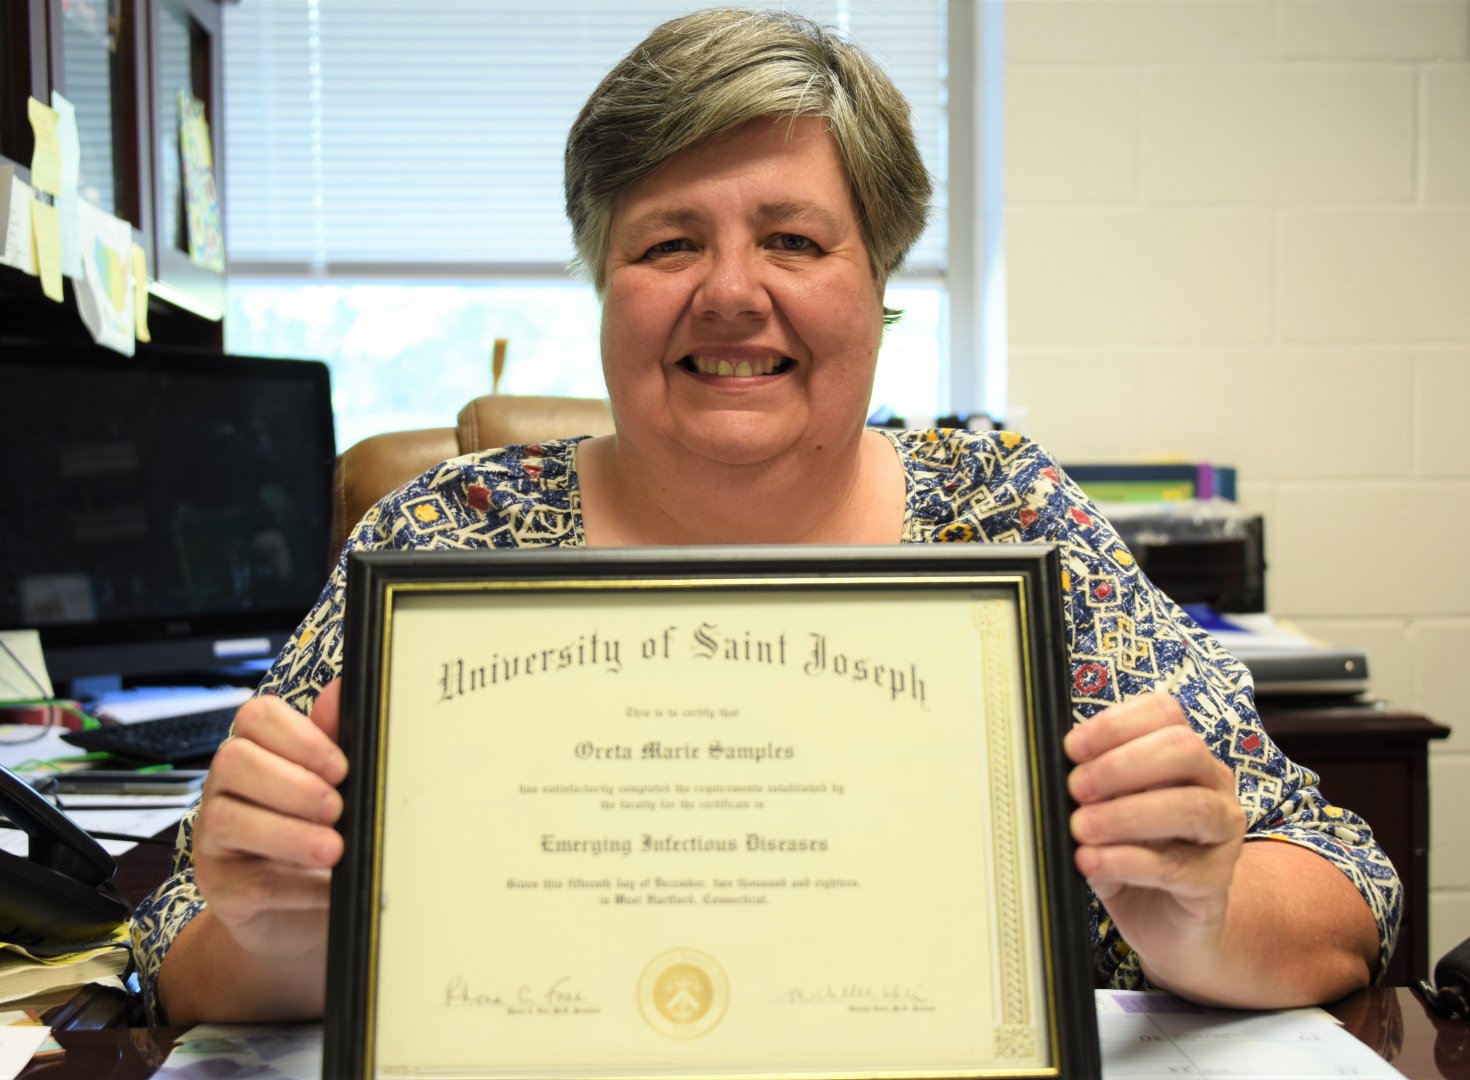 Dr. Oreta Samples, assistant professor and program coordinator of Fort Valley State University’s Master of Public Health Program, earned a certificate in Emerging Infectious Diseases from the University of Saint Joseph.